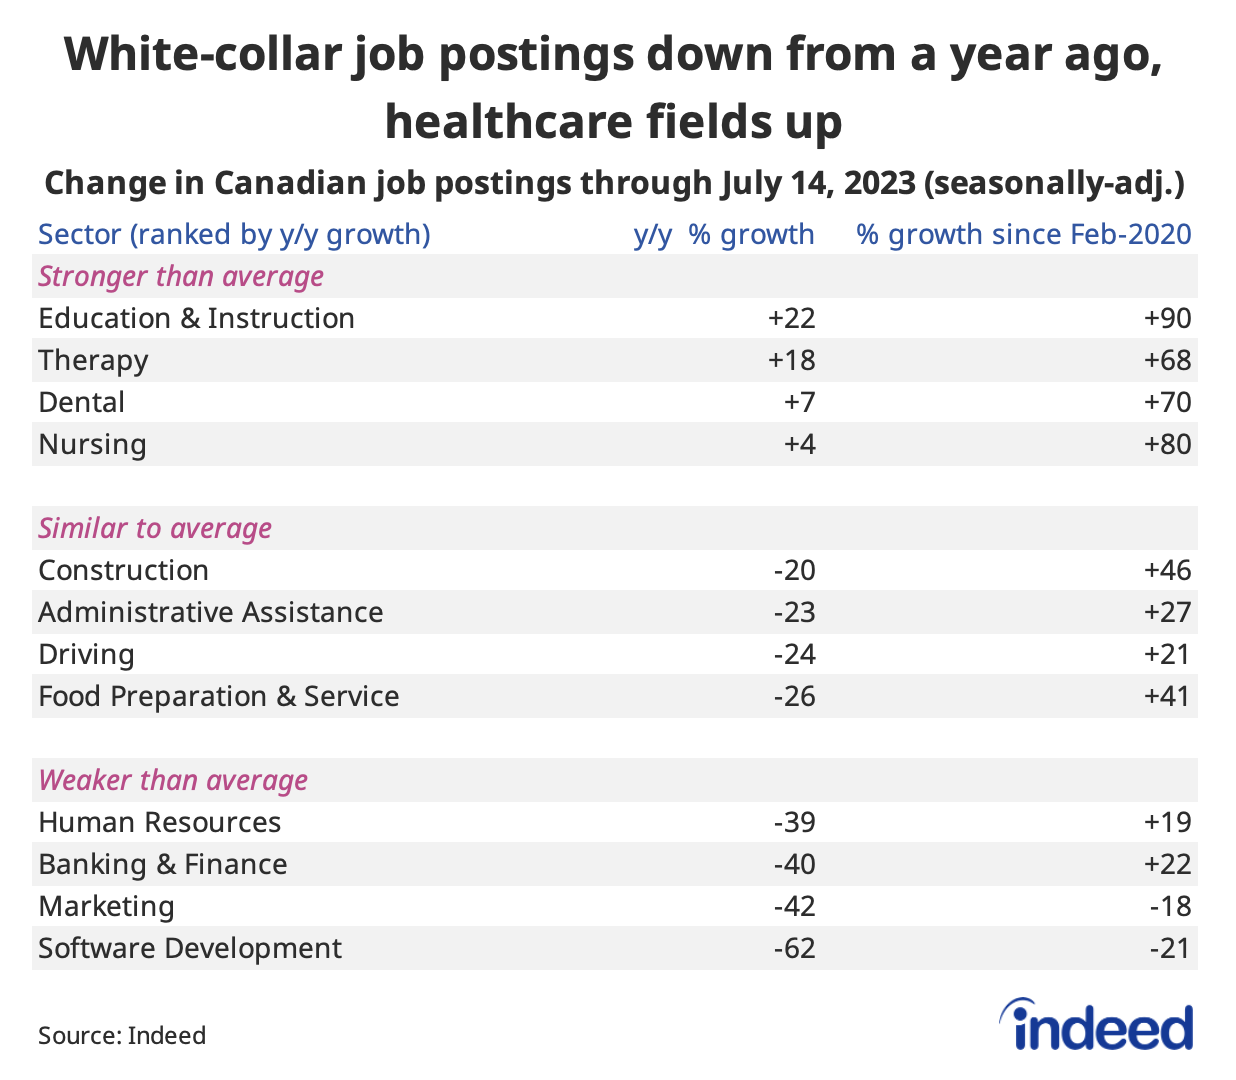 Table titled “White-collar job postings down from a year ago, healthcare fields up,” showing the year-over-year growth and net growth since February 1, 2020, in job postings across various sectors as of July 14, 2023, divided into sections “Stronger than average,” “Similar to average.” and “Weaker than average.” Postings in health fields are up somewhat from a year earlier, while most other sectors have declined, especially white-collar areas like marketing and software development. 